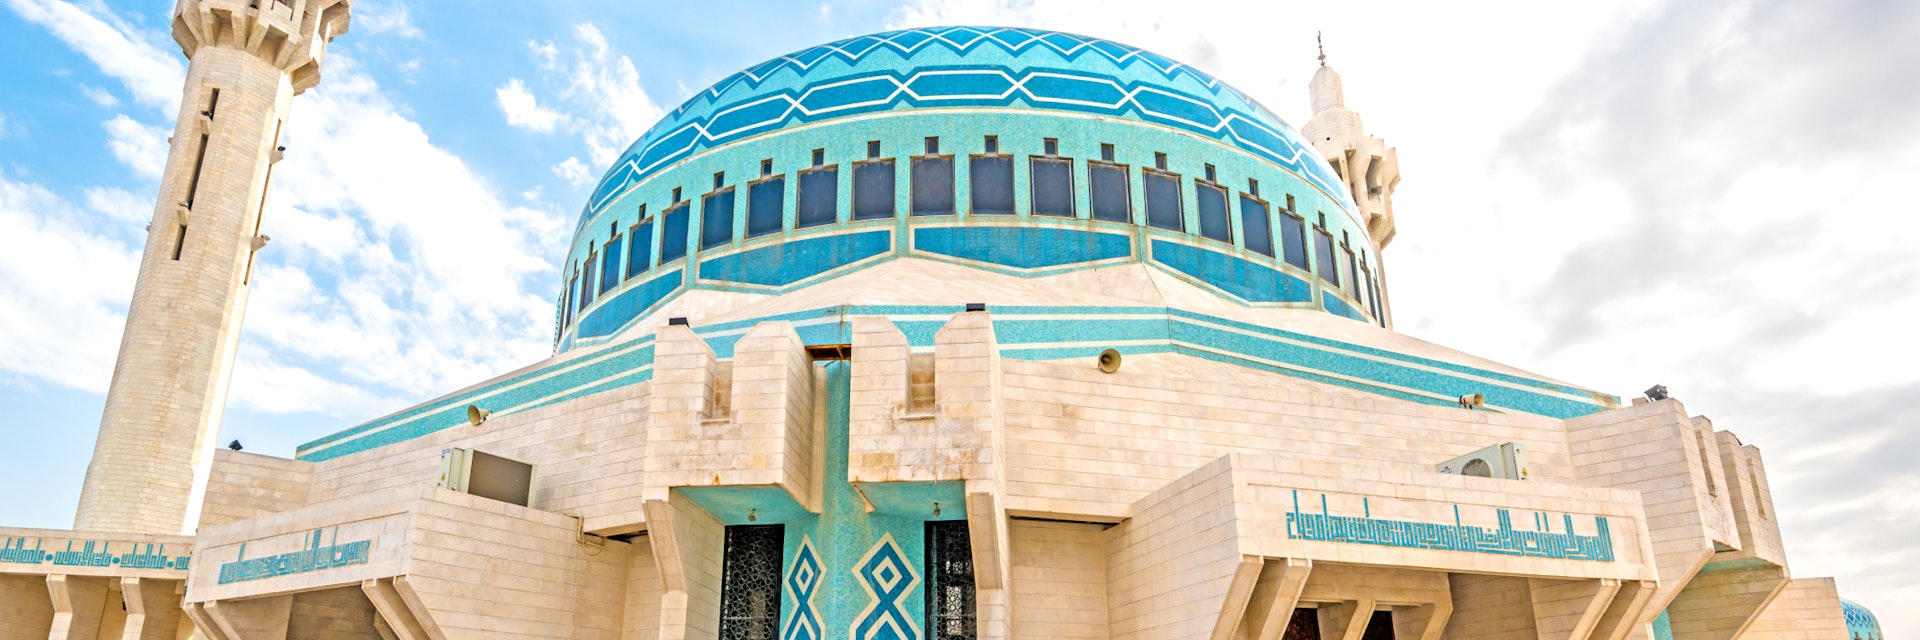 King Abdullah I Mosque in Amman, Jordan.  It was built between 1982 and 1989. ; Shutterstock ID 172726706; Your name (First / Last): Lauren Keith; GL account no.: 65050; Netsuite department name: Content Asset; Full Product or Project name including edition: Jordan 2017